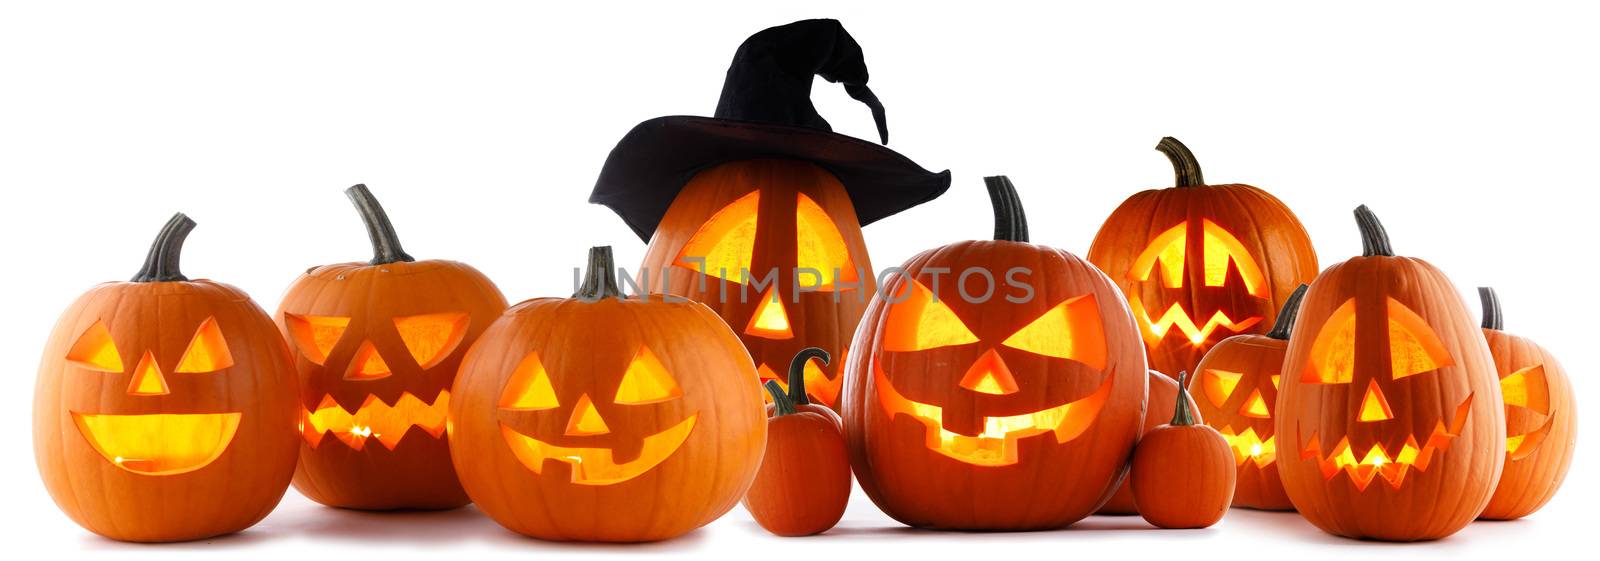 A collection of Jack O Lantern Halloween pumpkins with various different designs and witches hat in a row isolated on white background